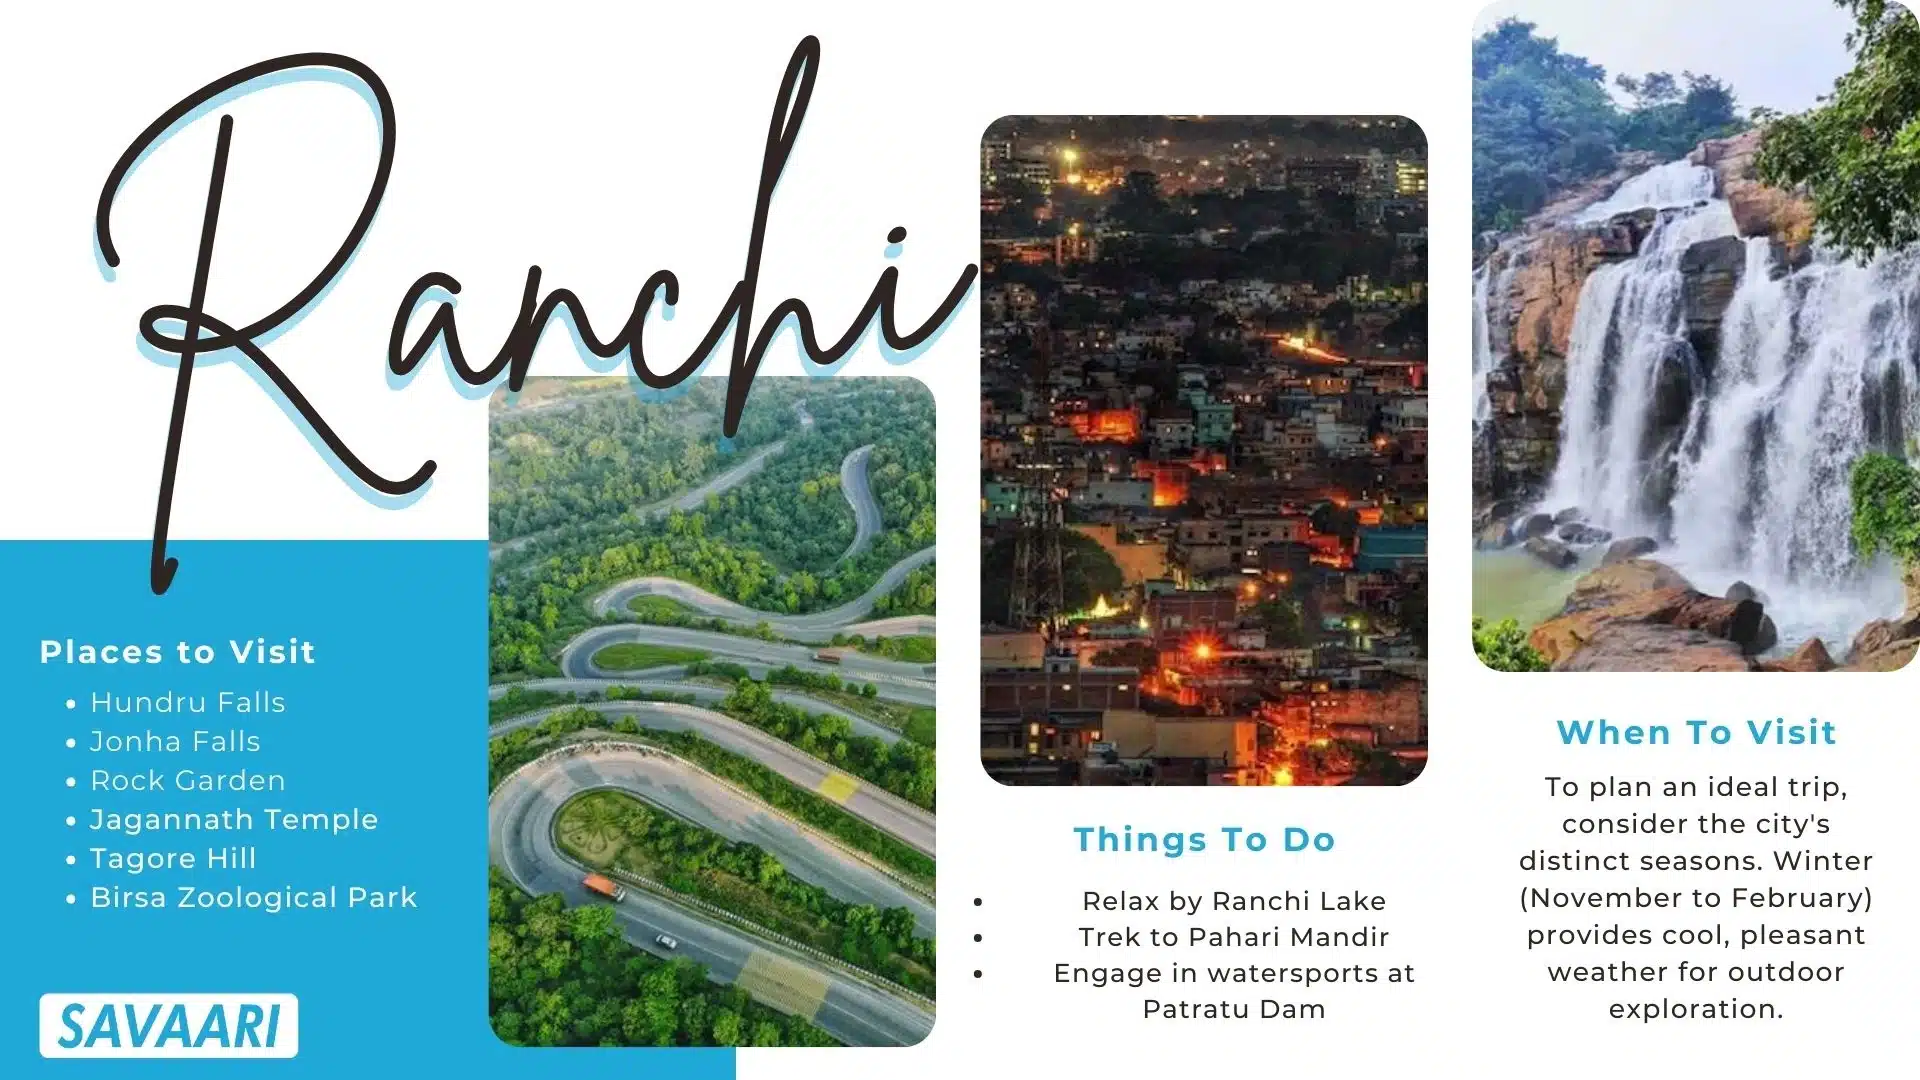 Things to do in Ranchi
